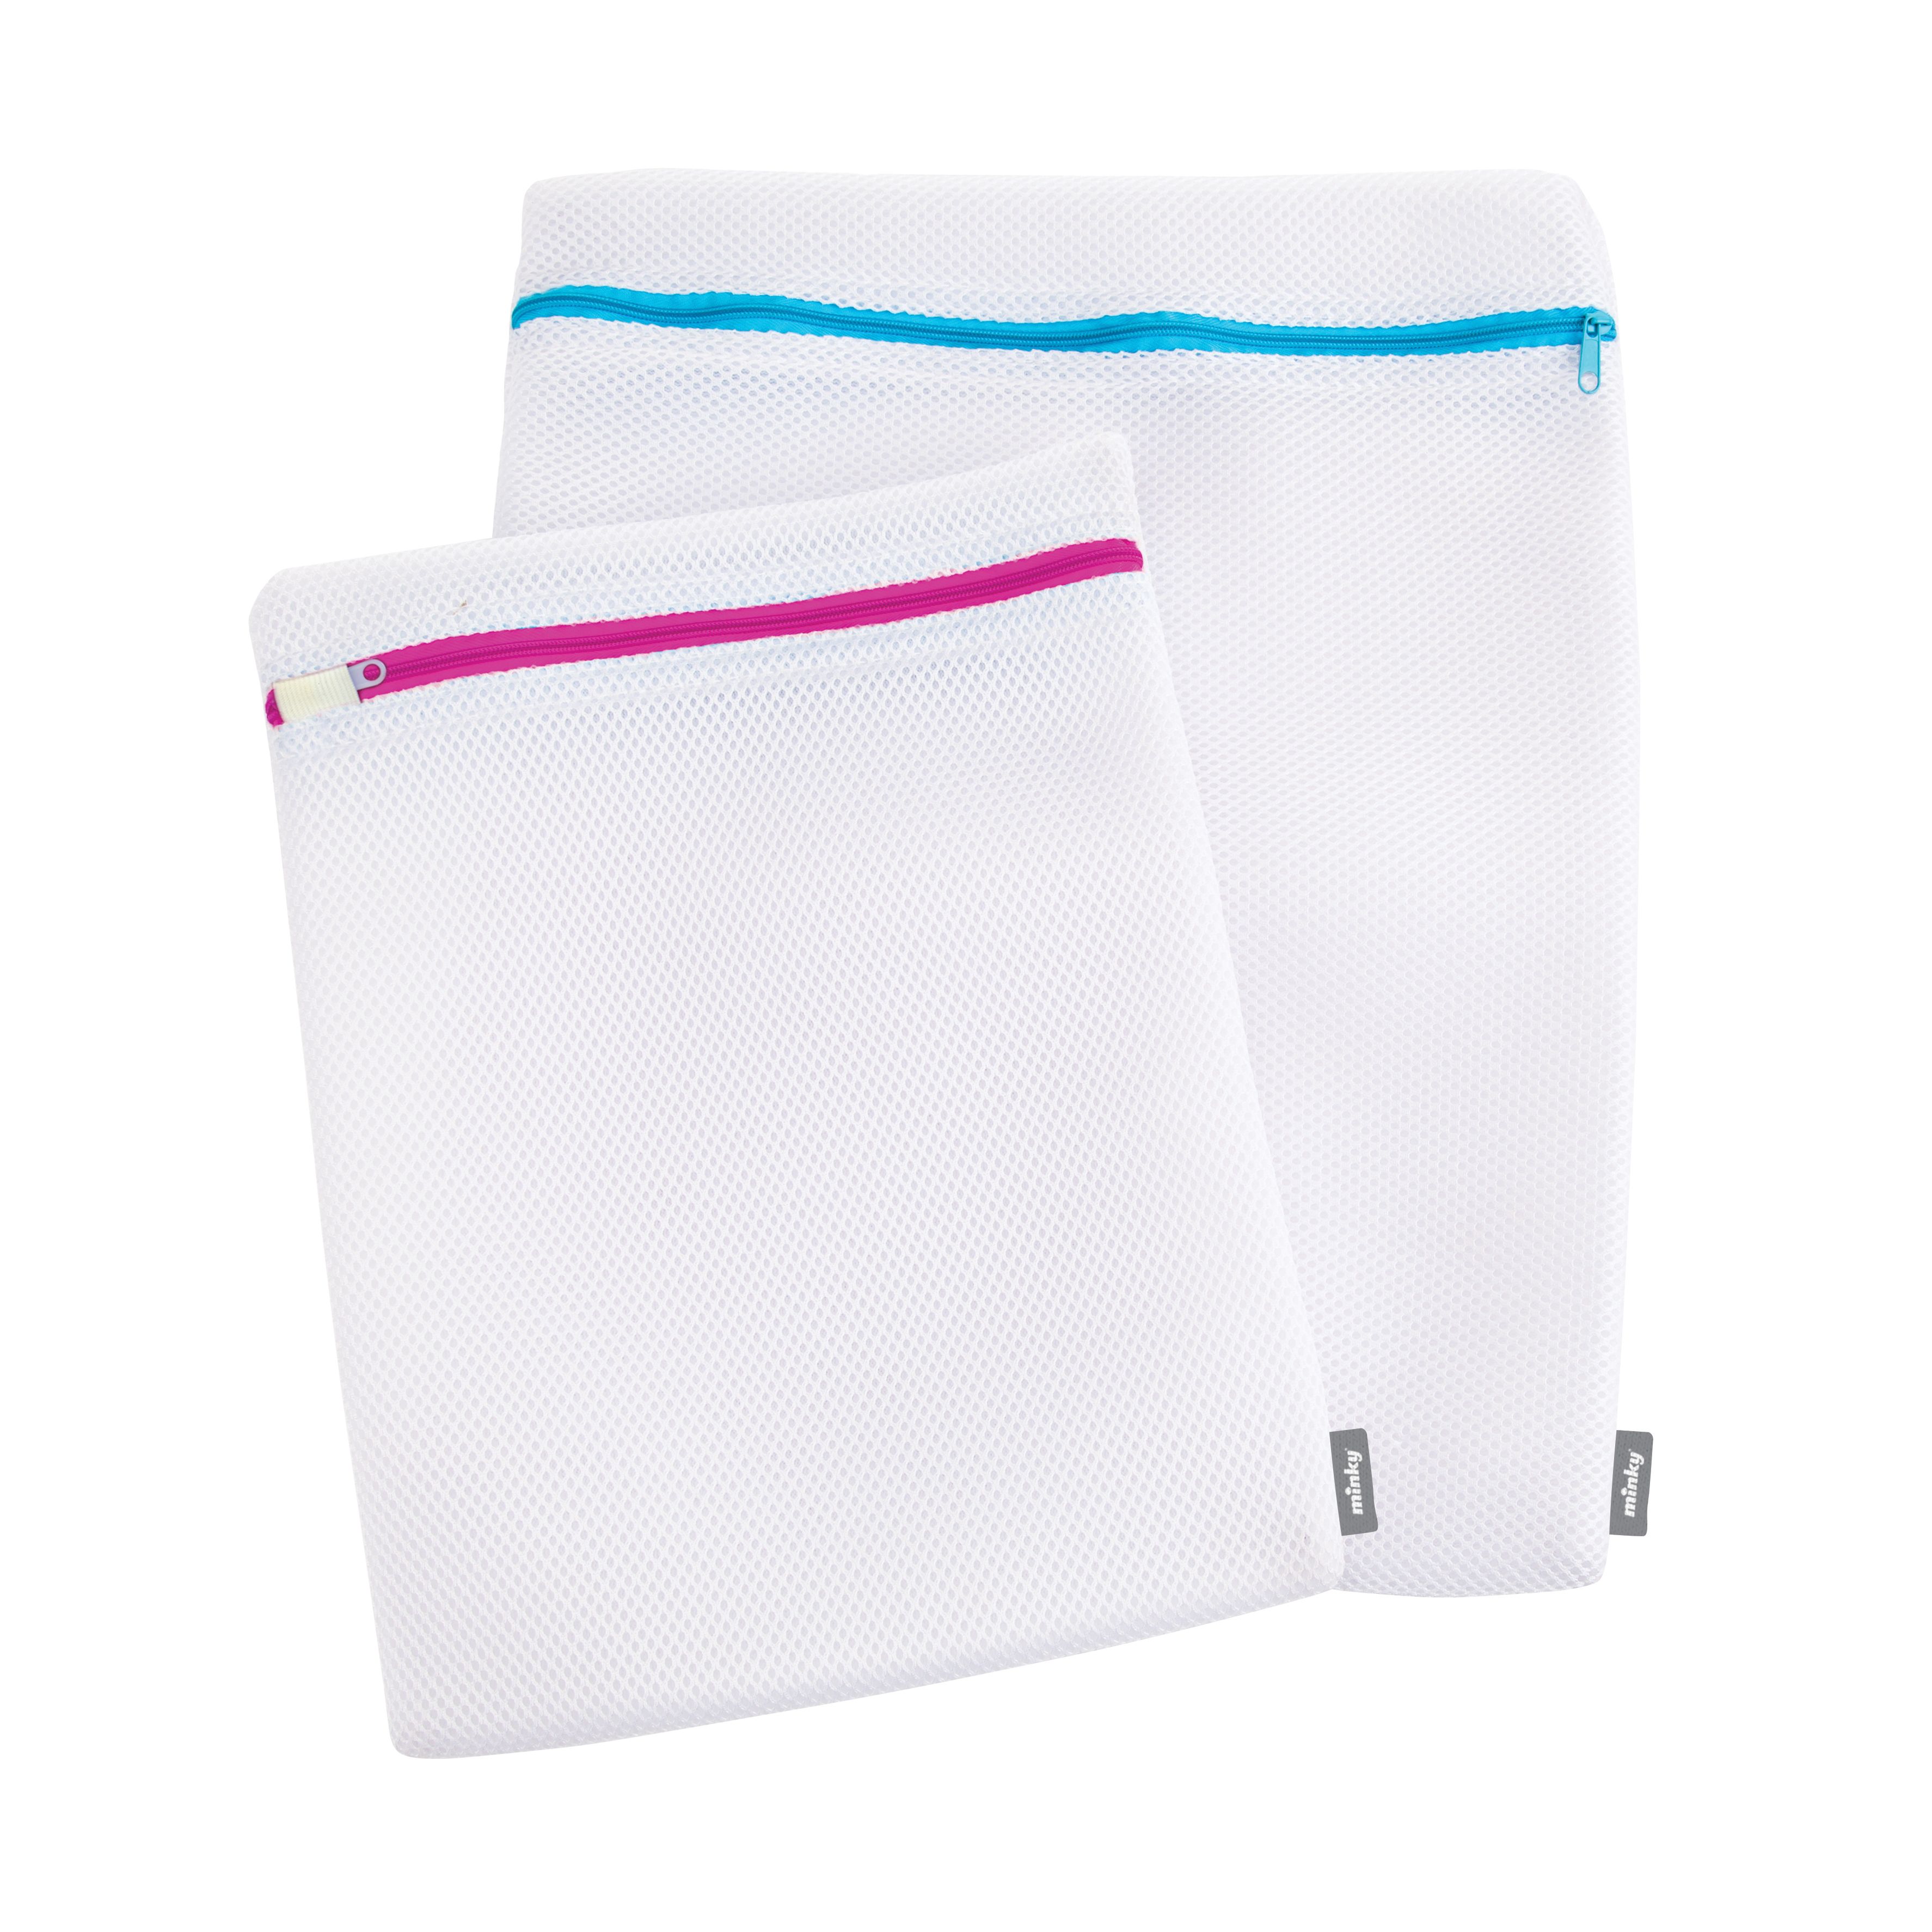 Minky Bra Wash Bags – Pack of 2, Laundry Accessories